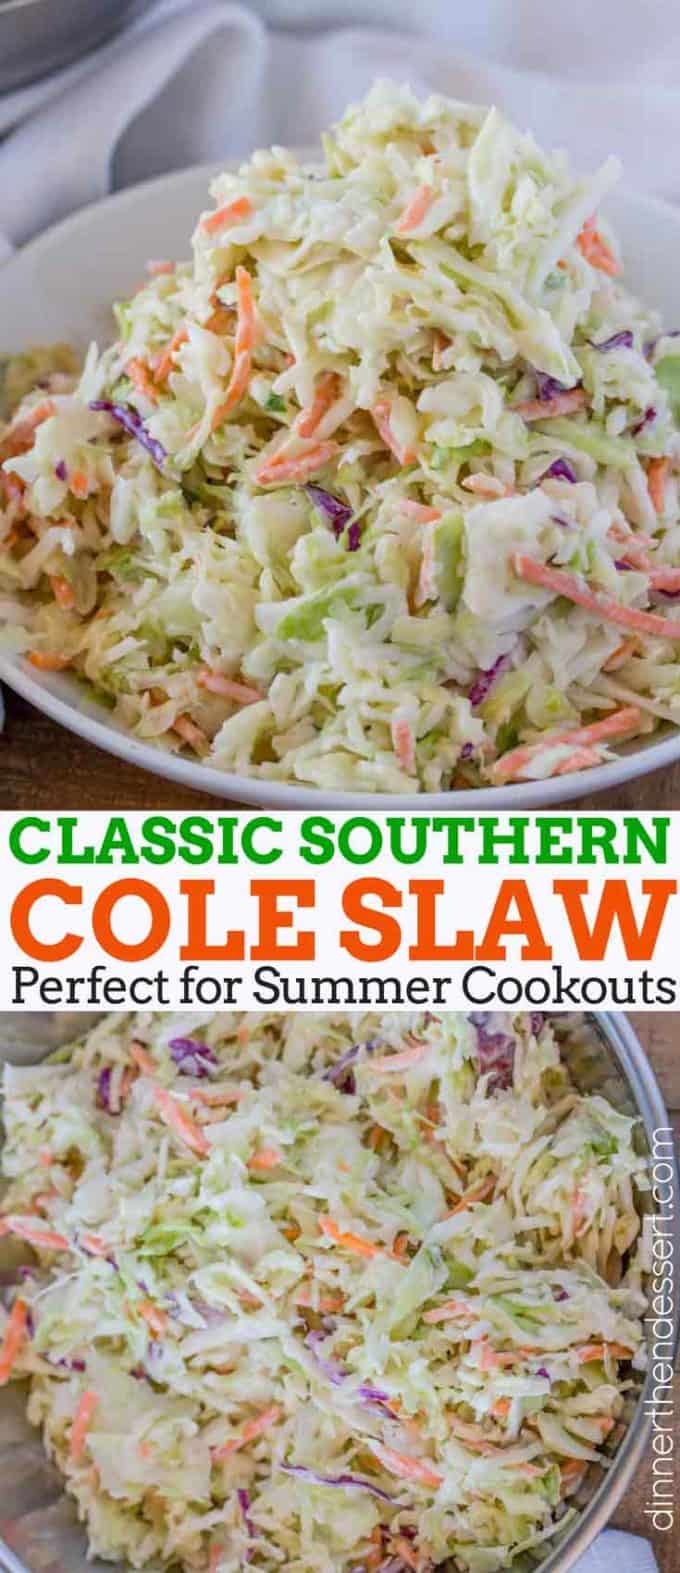 Summer Southern Cole Slaw